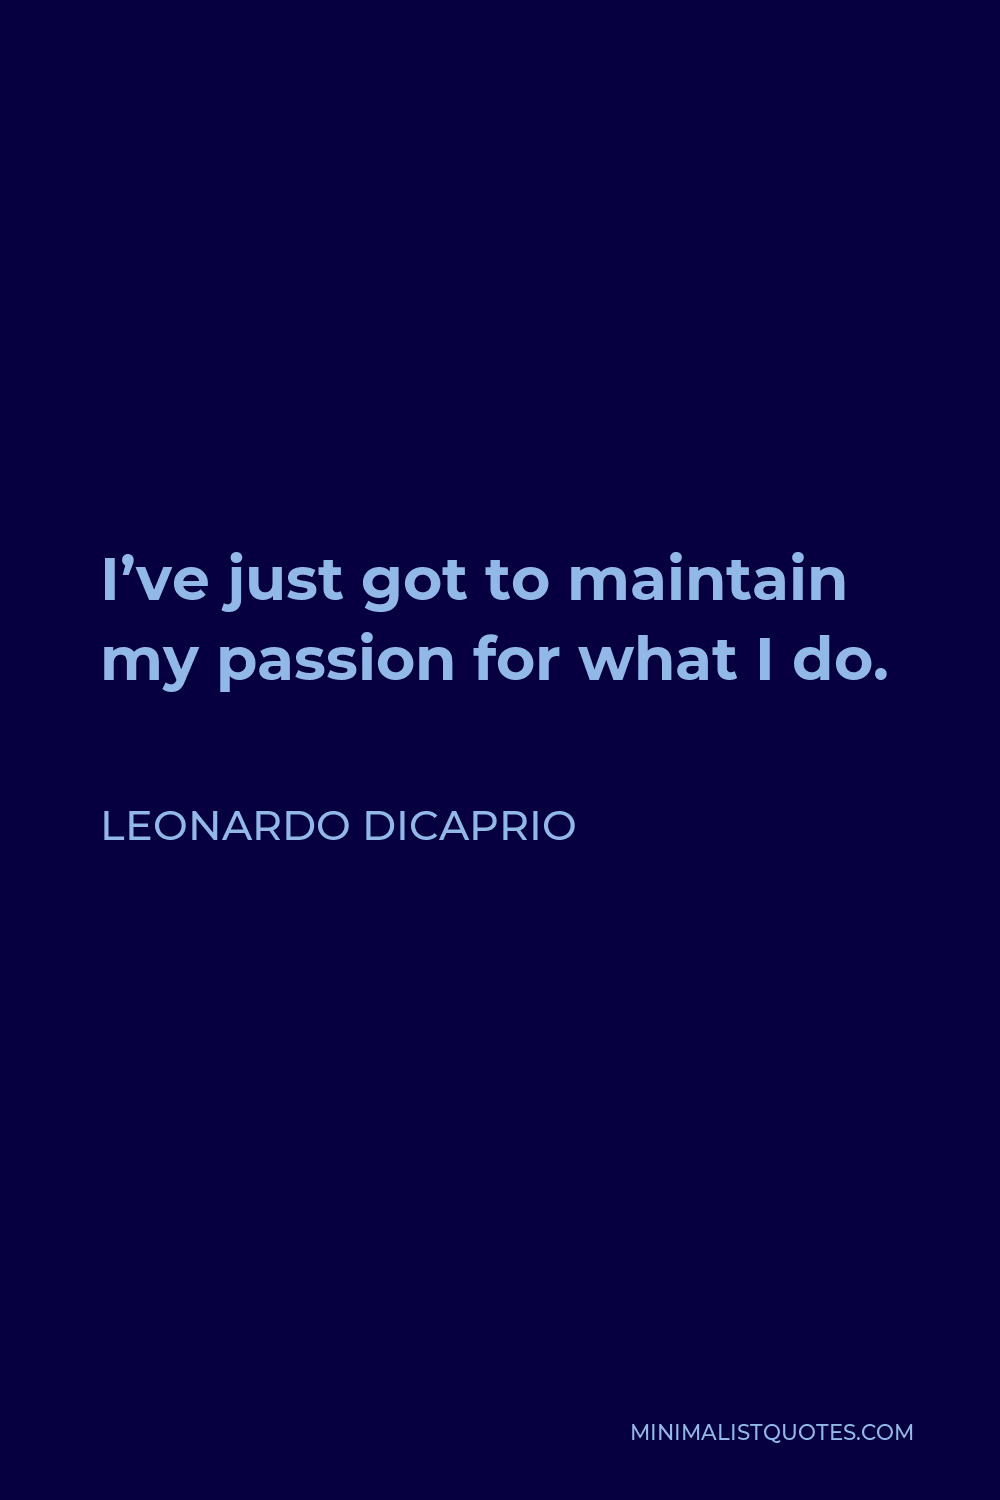 Leonardo DiCaprio Quote - I’ve just got to maintain my passion for what I do.